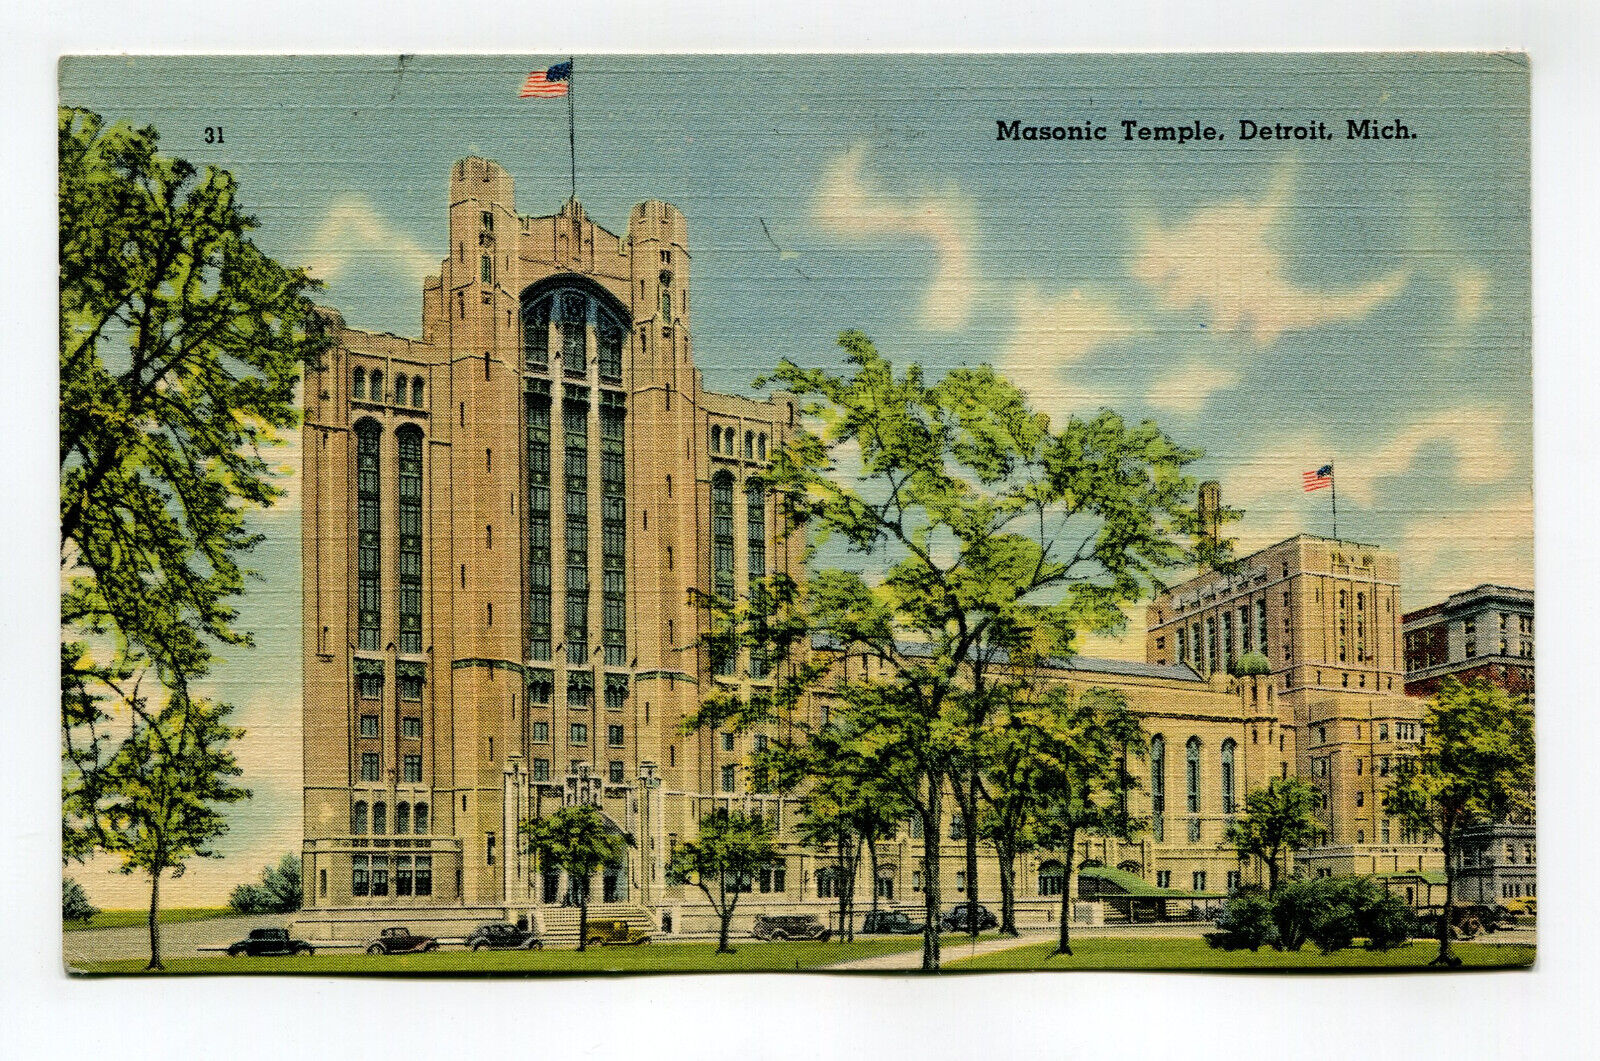 MASONIC TEMPLE DETROIT MICH LARGEST STRUCTURE DEVOTED TO MASONIC PURPOSES